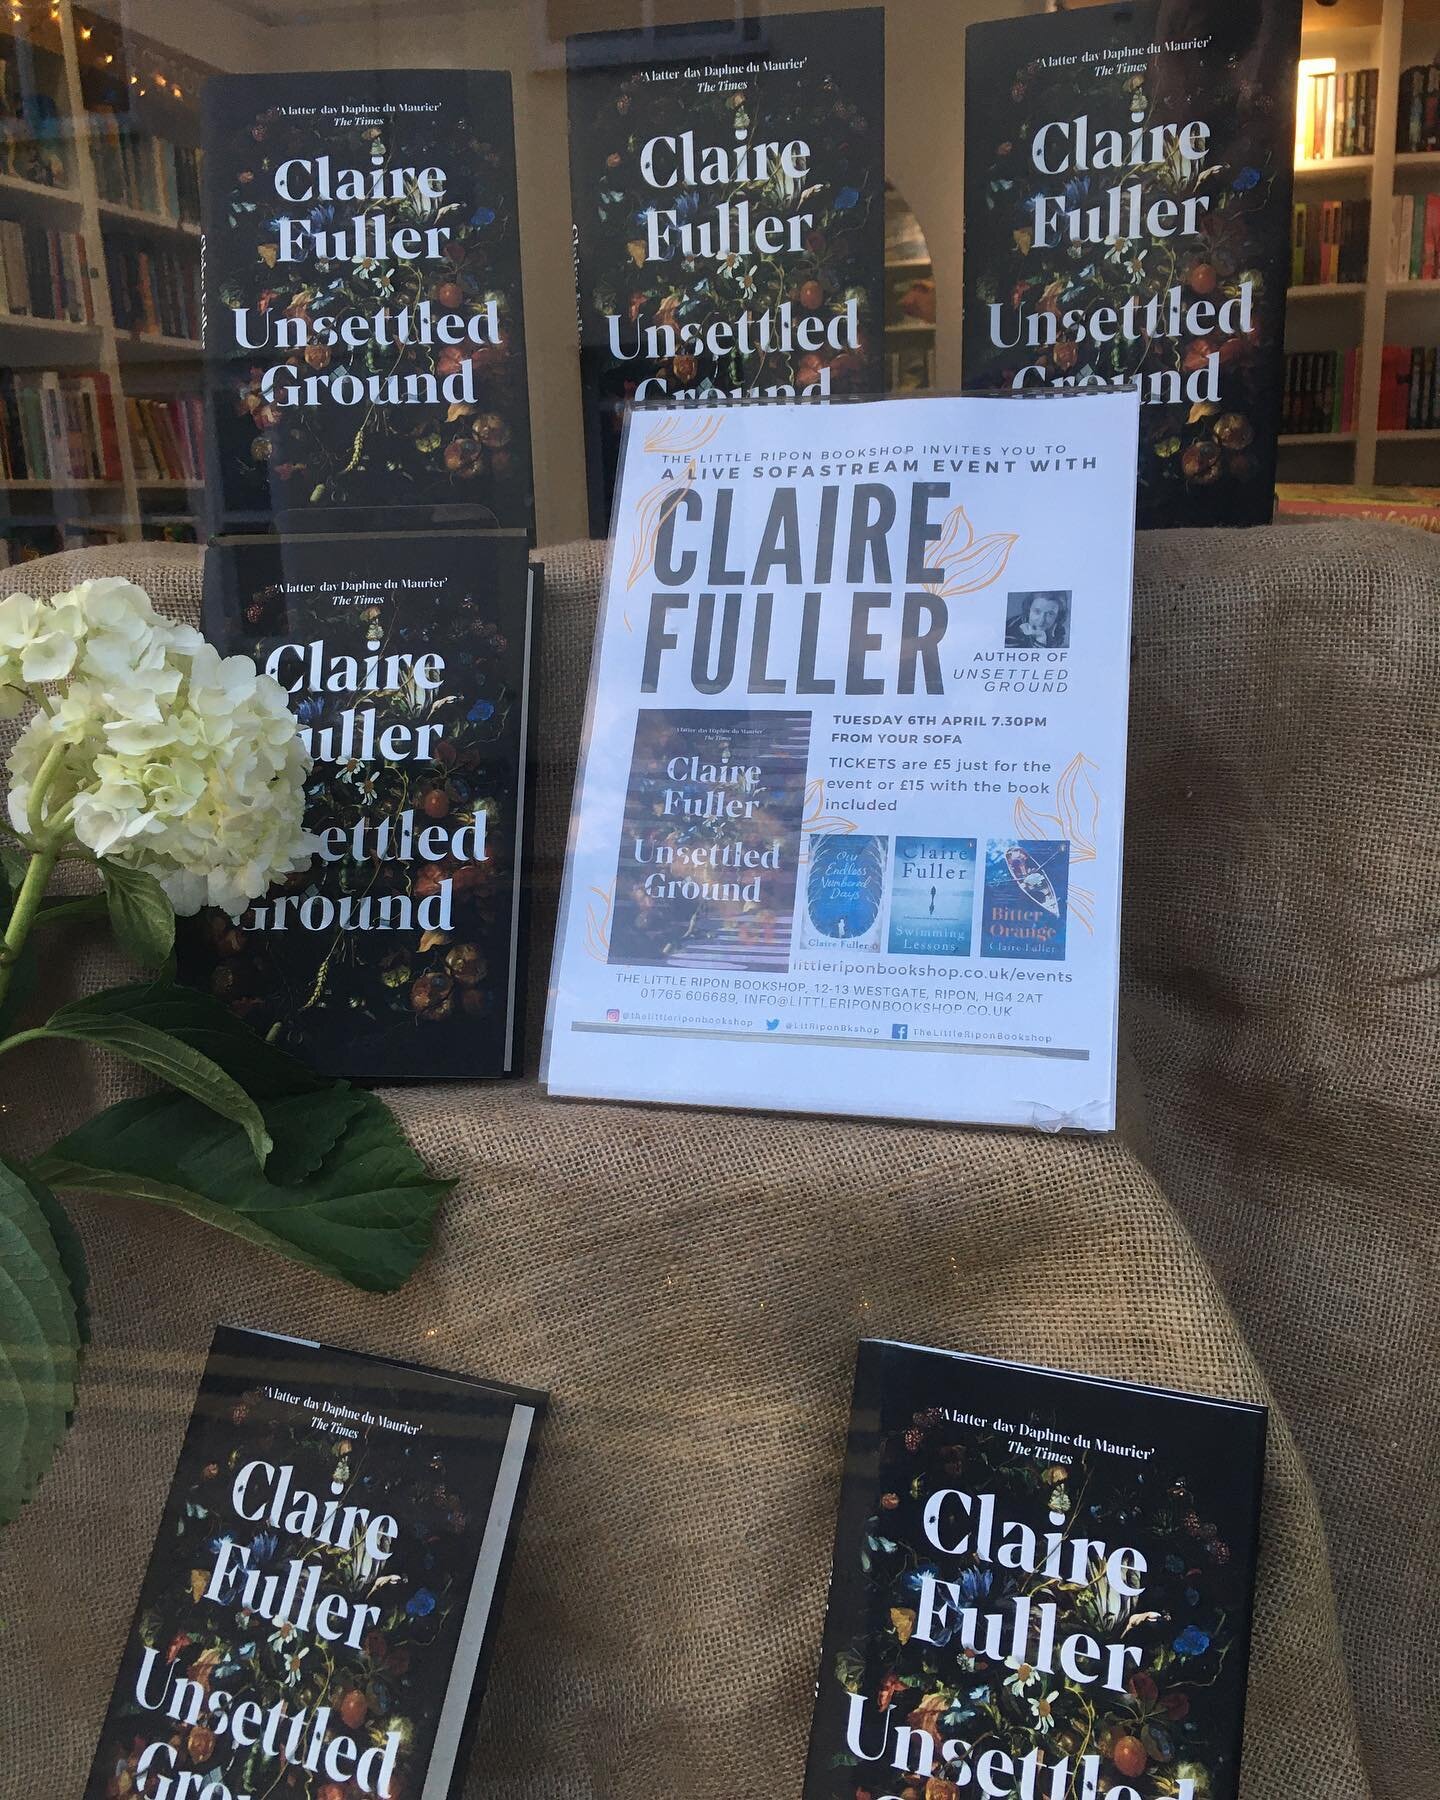 Happy Publication Day to @writerclairefuller! Unsettled Ground is out today with it&rsquo;s glorious jacket and gripping story of life on the fringes of society. A moving portrait of a family struggling to come to survive grief, betrayal and a new tr